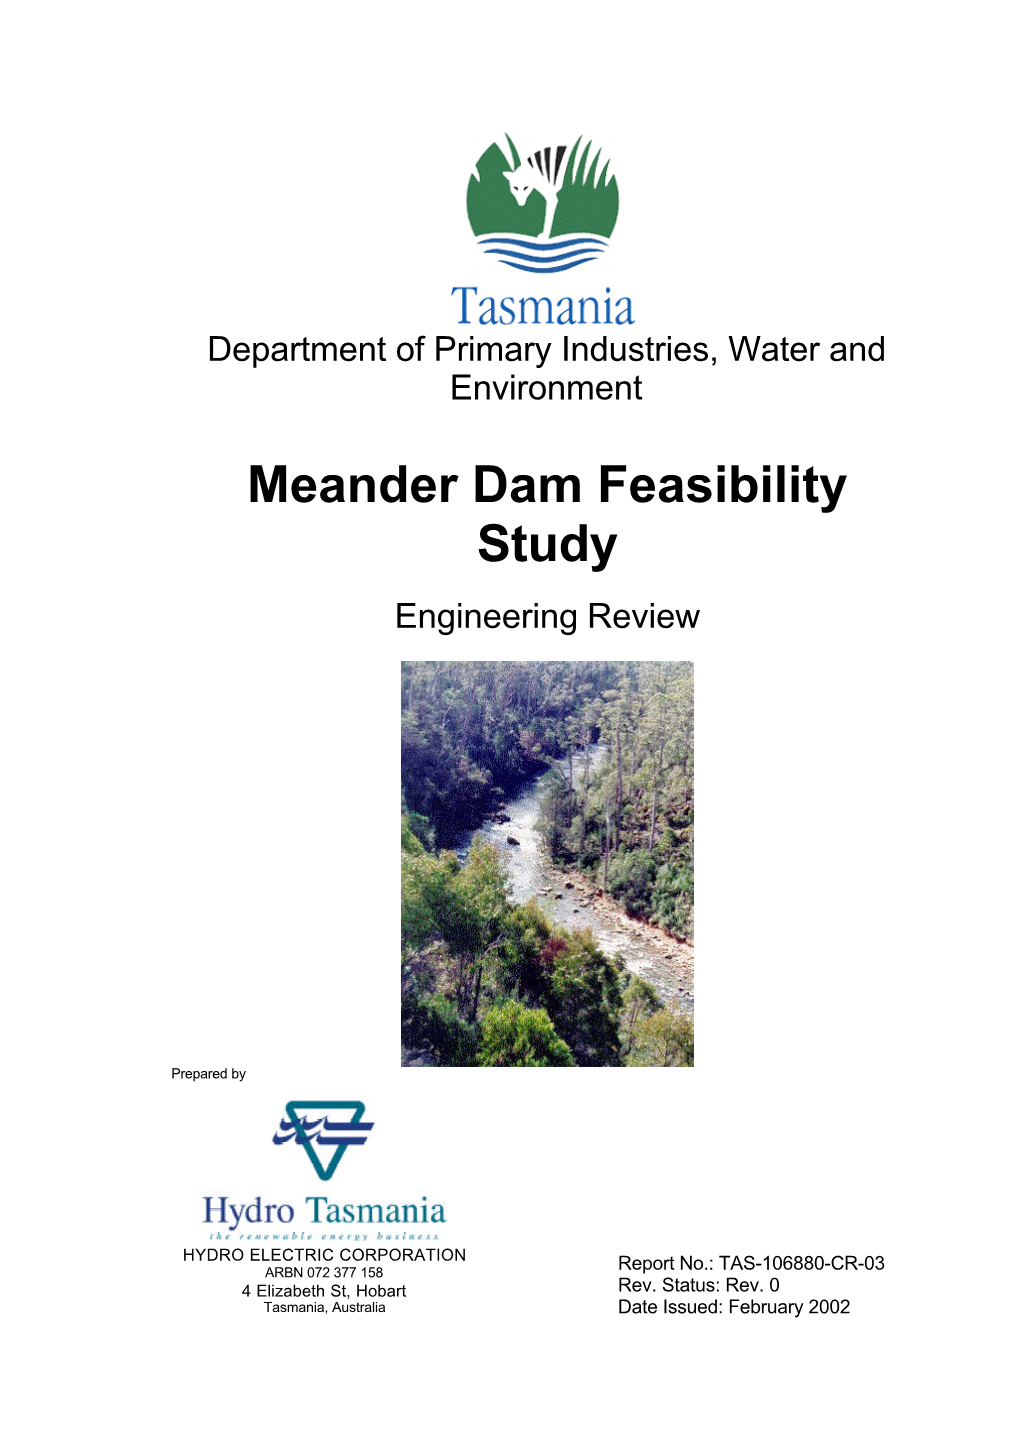 Meander Dam Feasibility Study Engineering Review